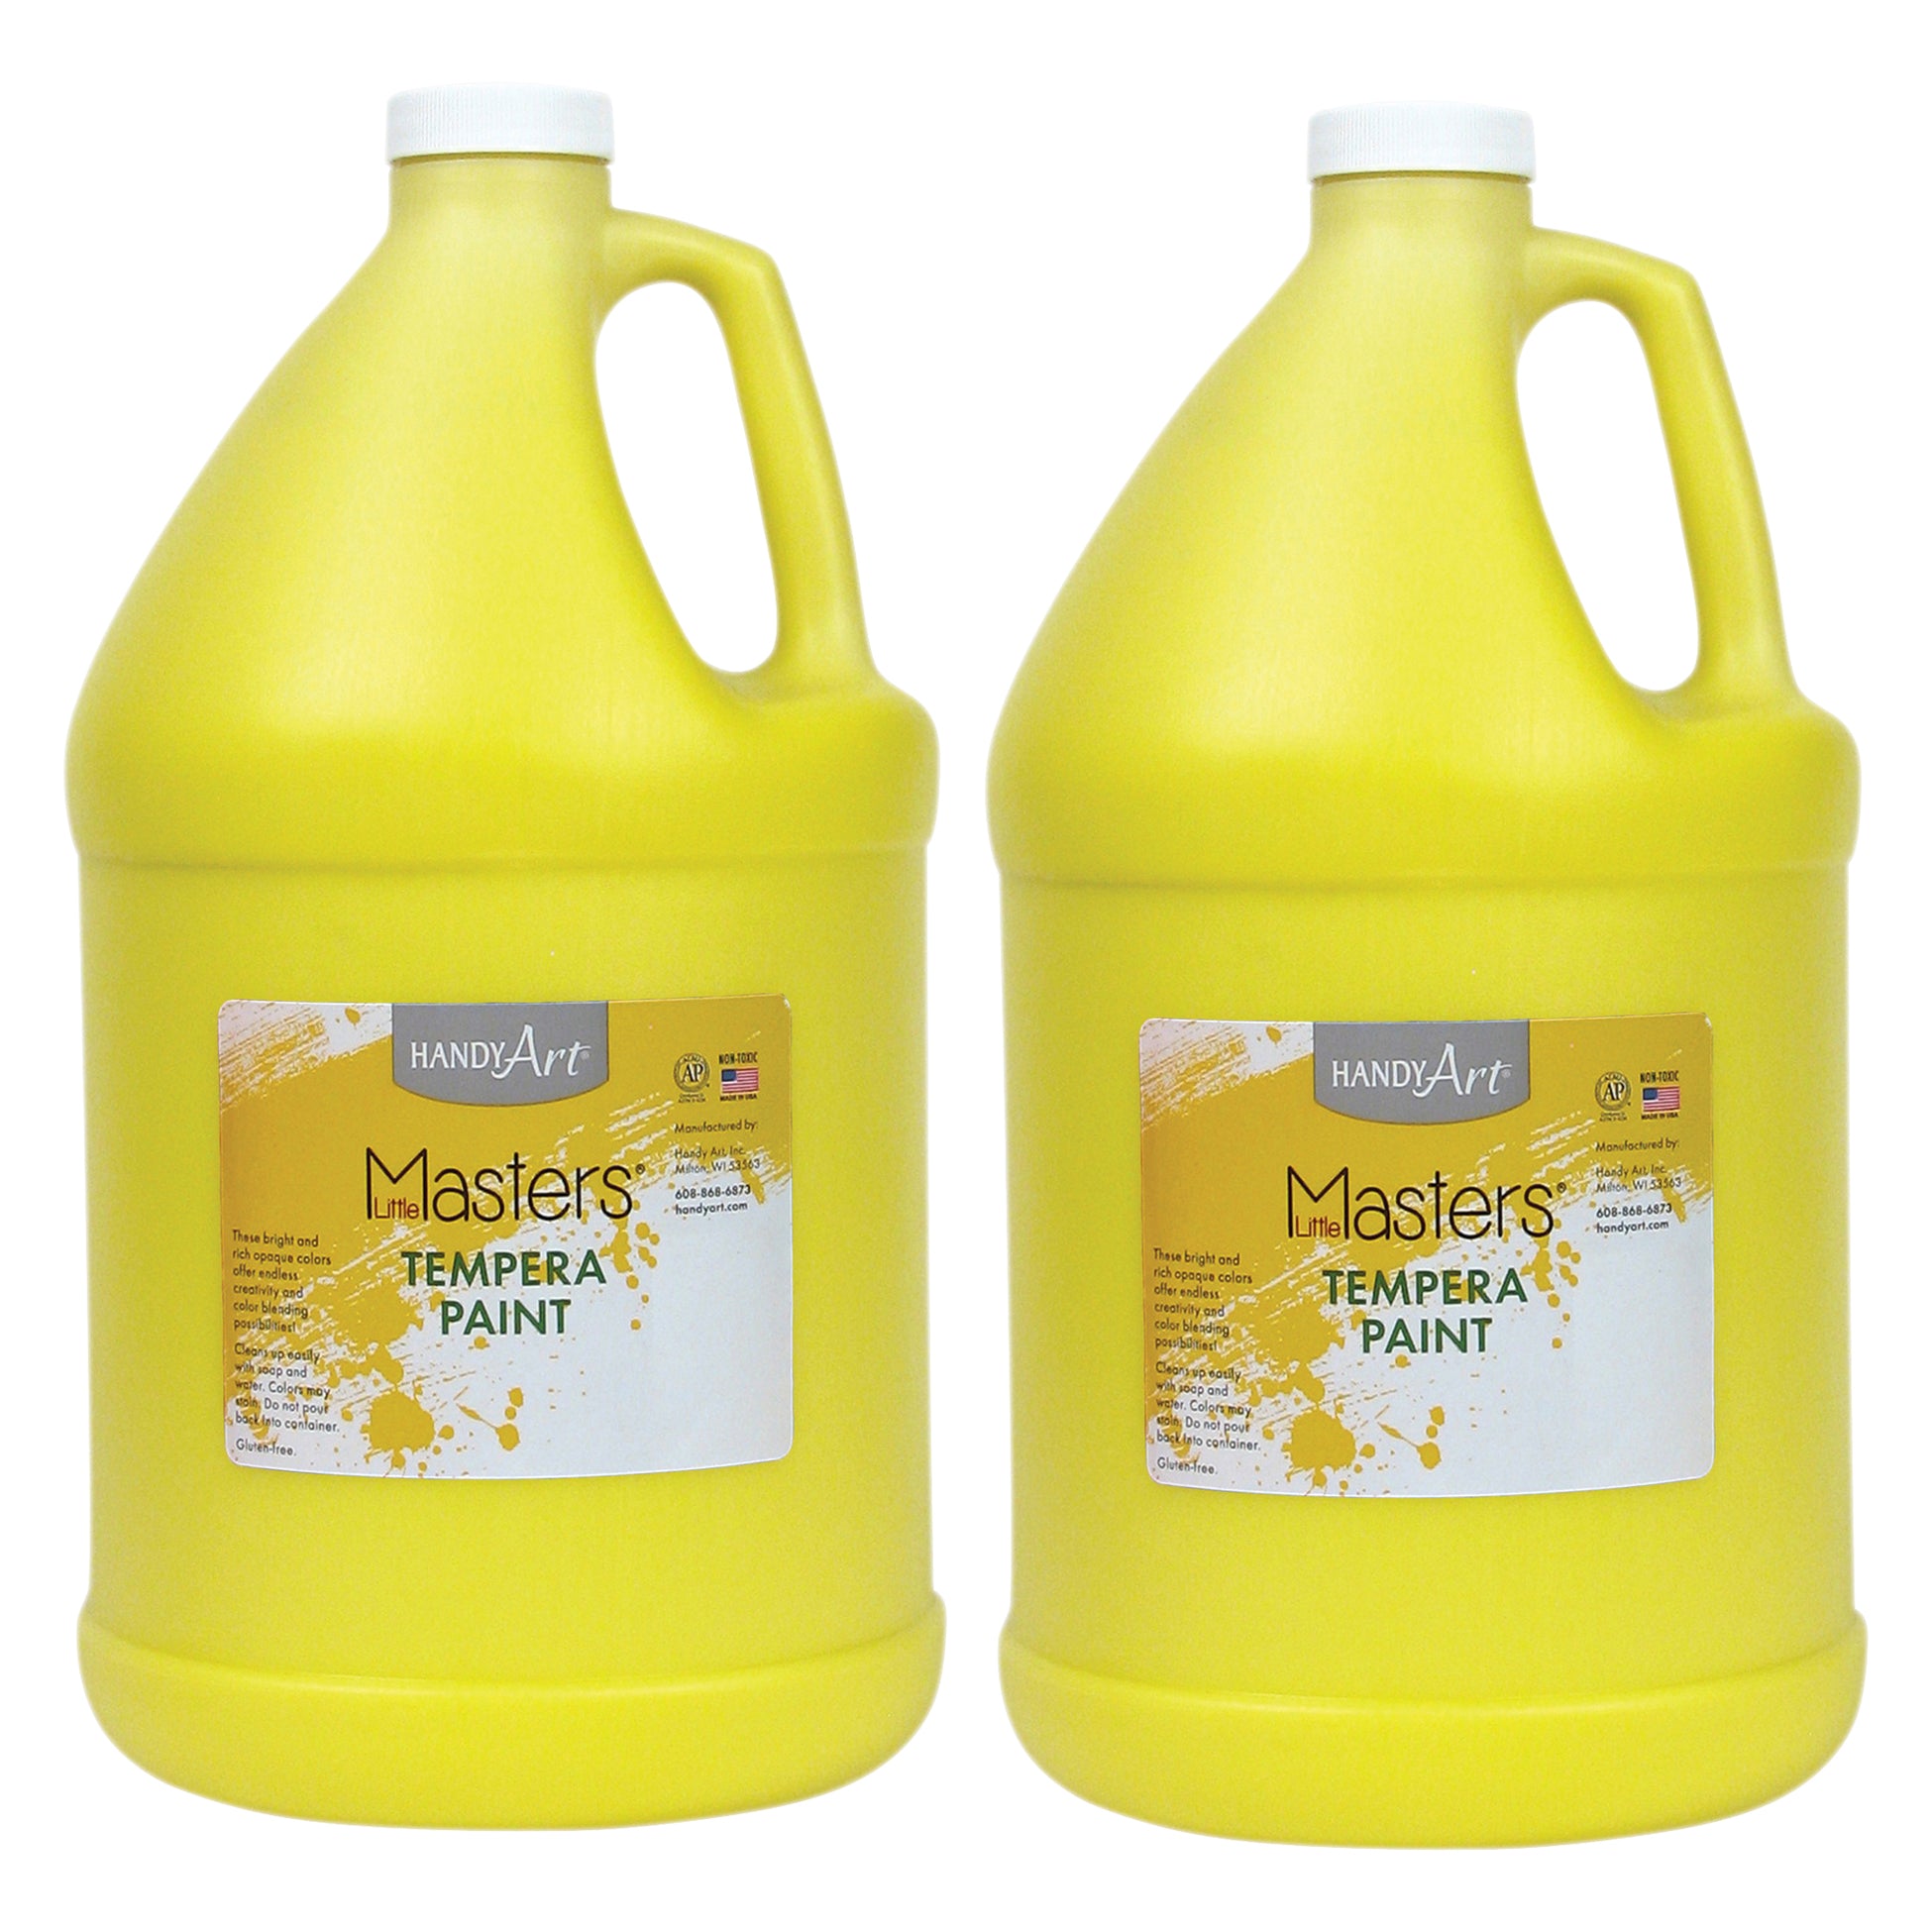 Little Masters® Tempera Paint, Yellow, Gallon, Pack of 2